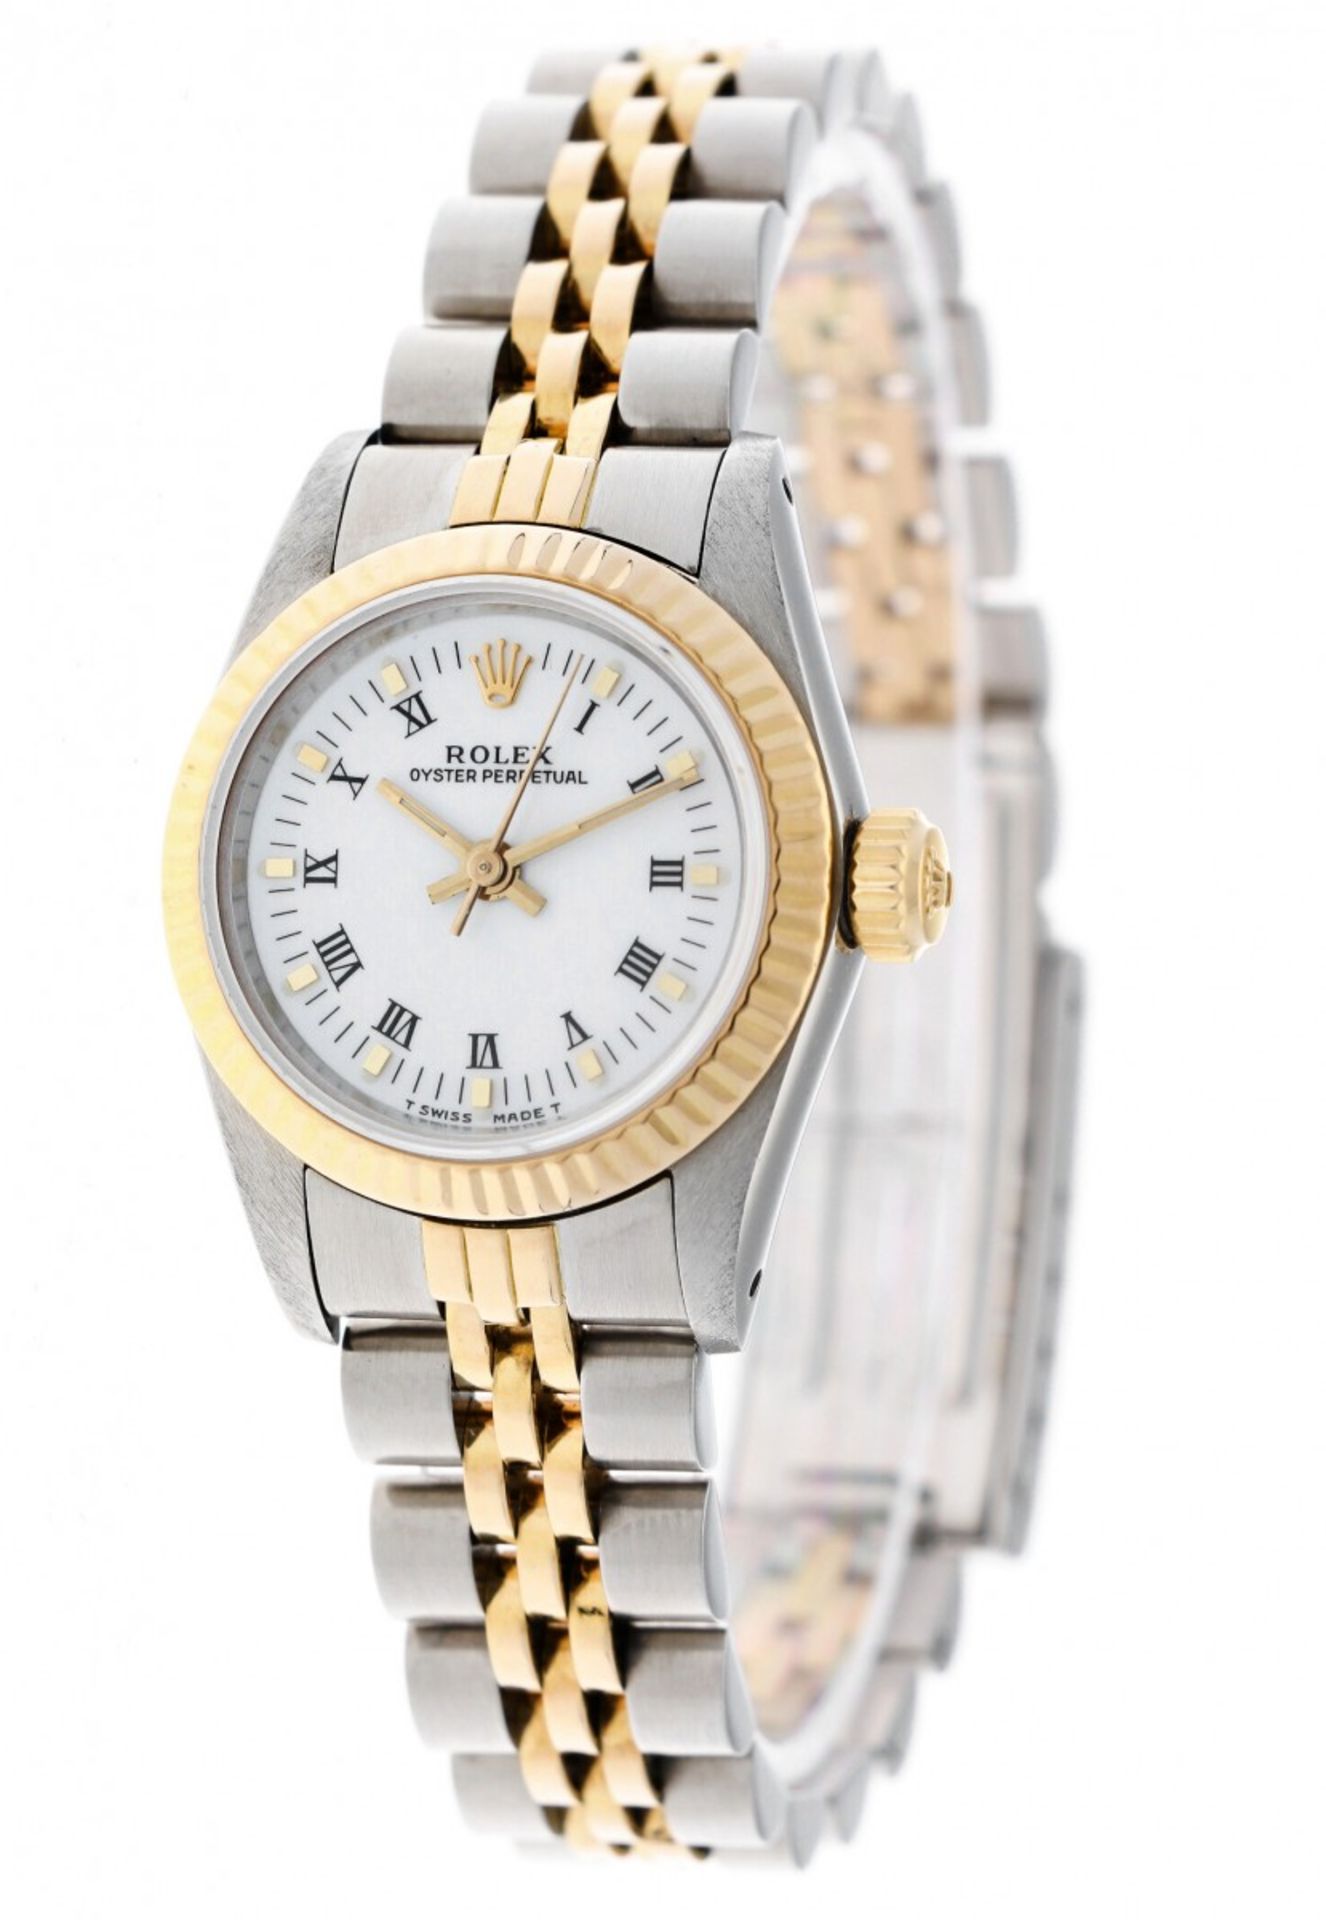 Rolex Oyster Perpetual 67193 - Ladies watch - ca. 1987 - Image 2 of 5